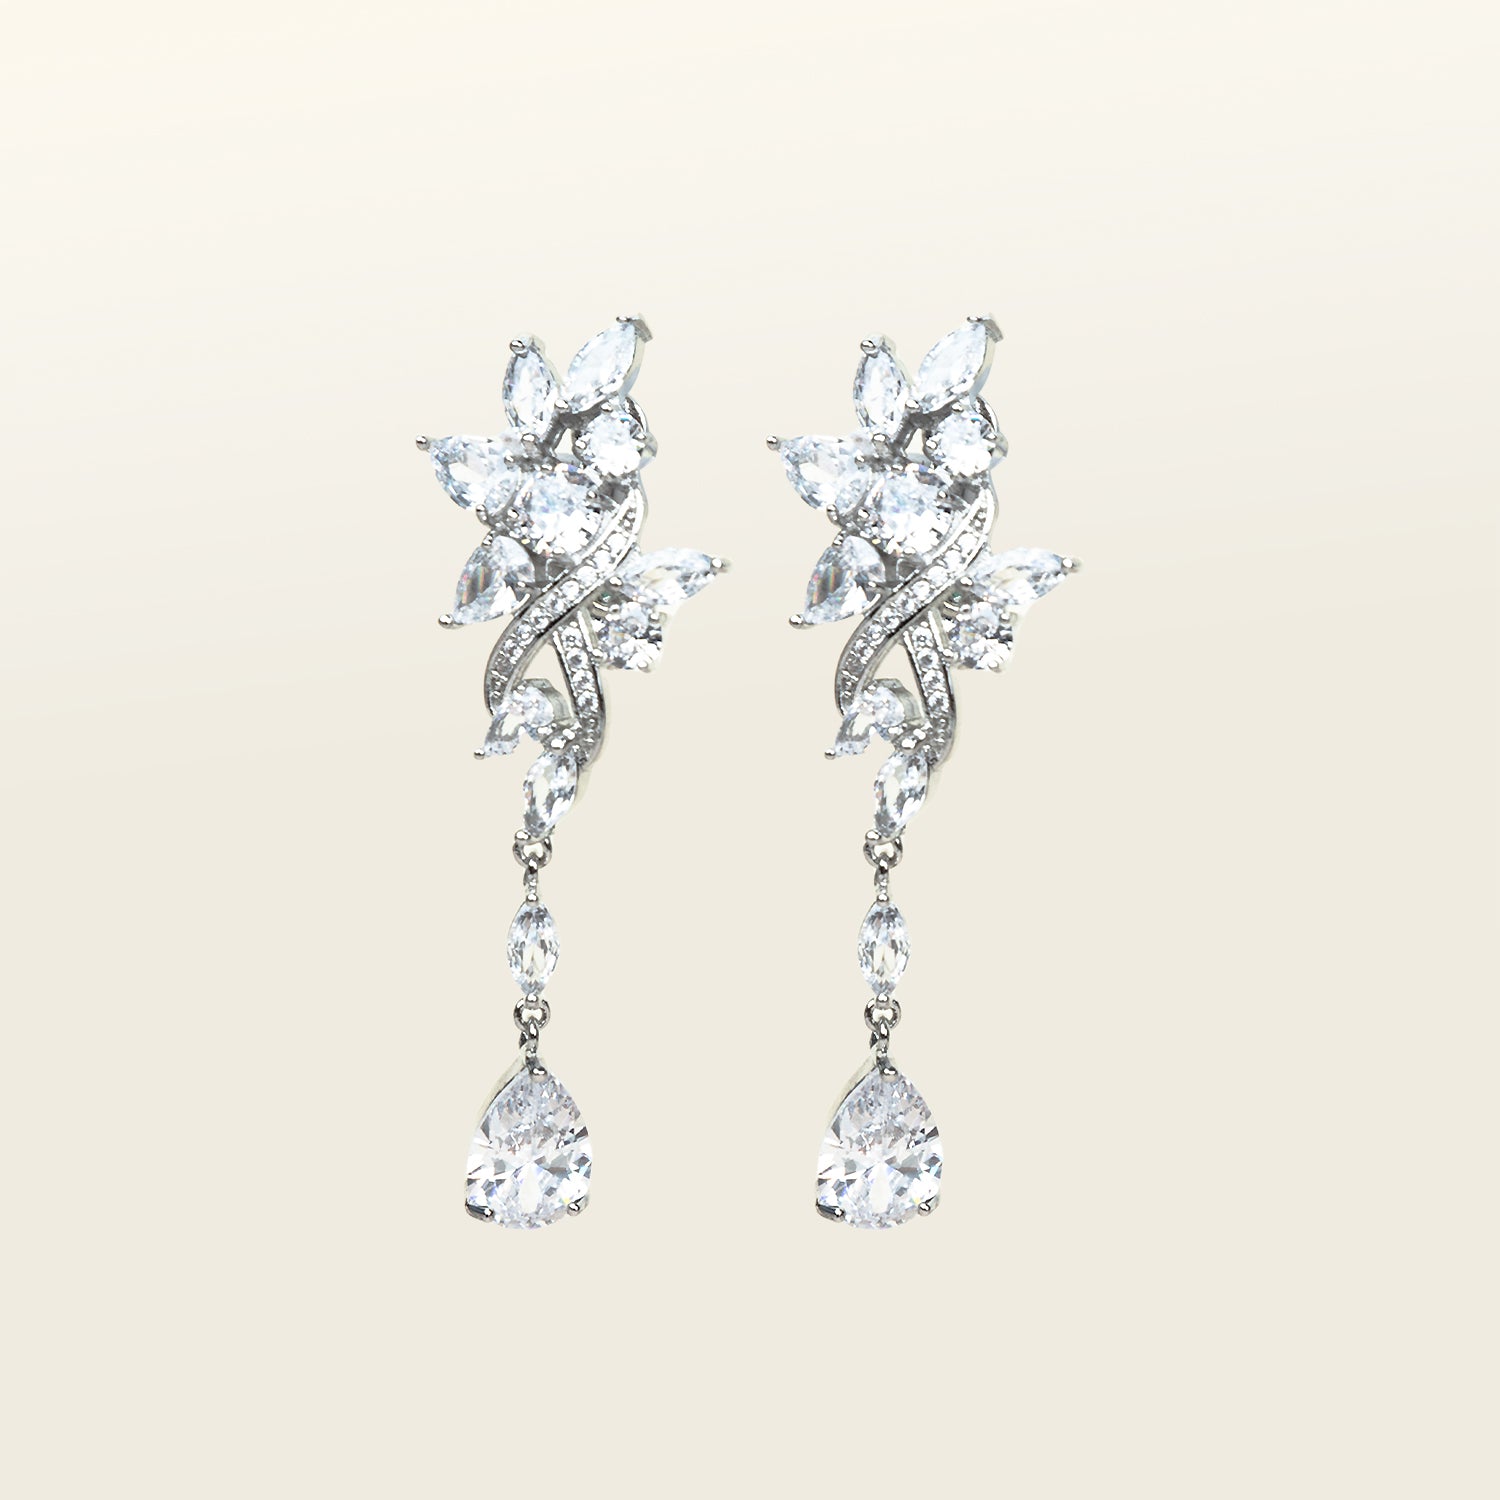 Image of the Evelyn Clip-On Earrings offer a secure fit for all ear types, ranging from thick/large ears to small/thin ears. With an average comfortable wear duration of 8-12 hours, these earrings have silver plated copper alloy components and feature a cubic zirconia setting. Additionally, the rubber padding is removable. Please note that this item is one pair.